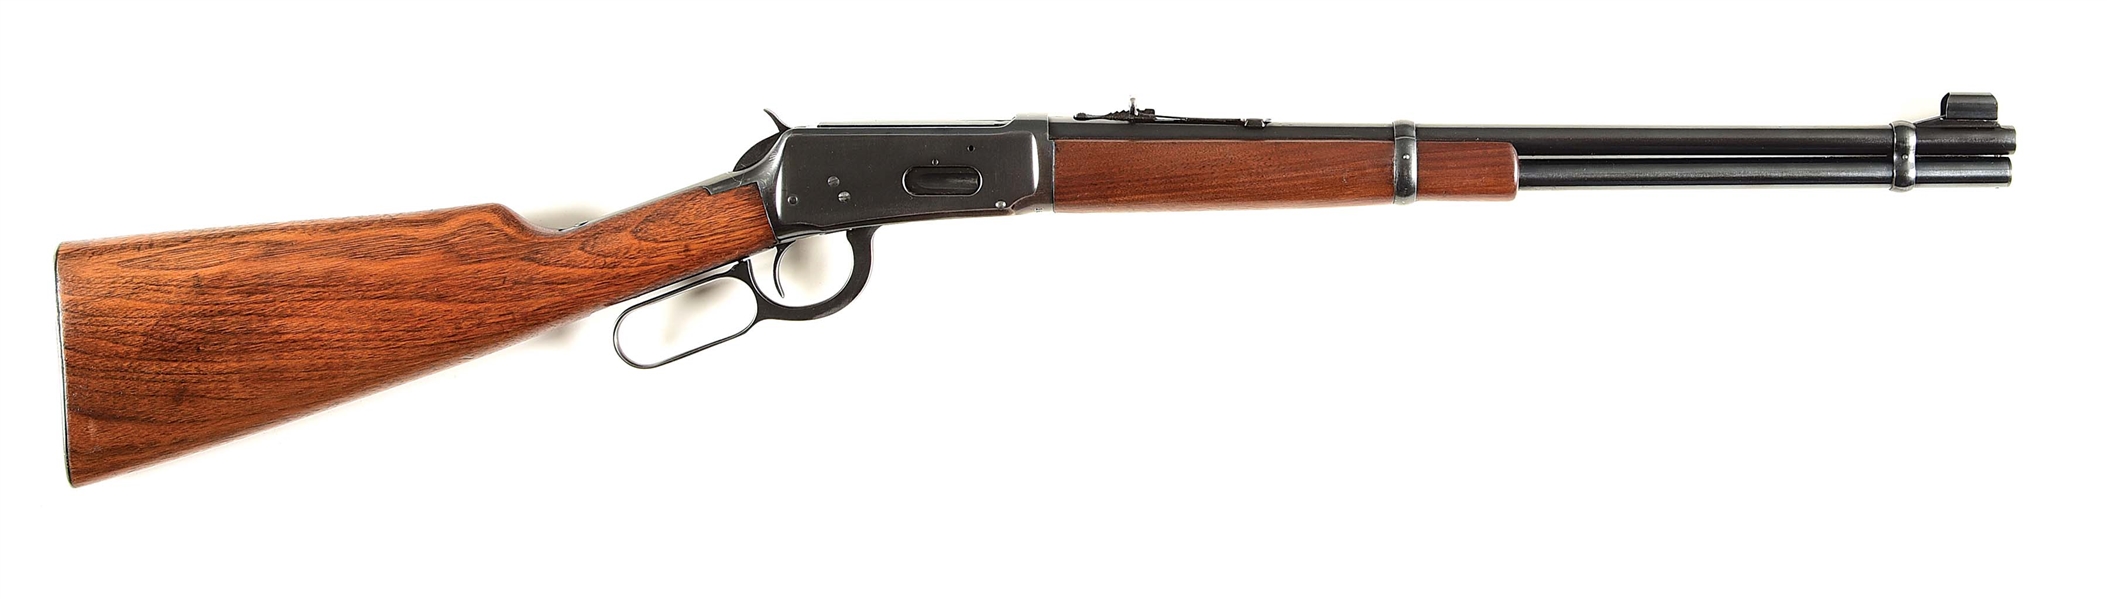 (C) WINCHESTER MODEL 1894 LEVER ACTION CARBINE (1950).